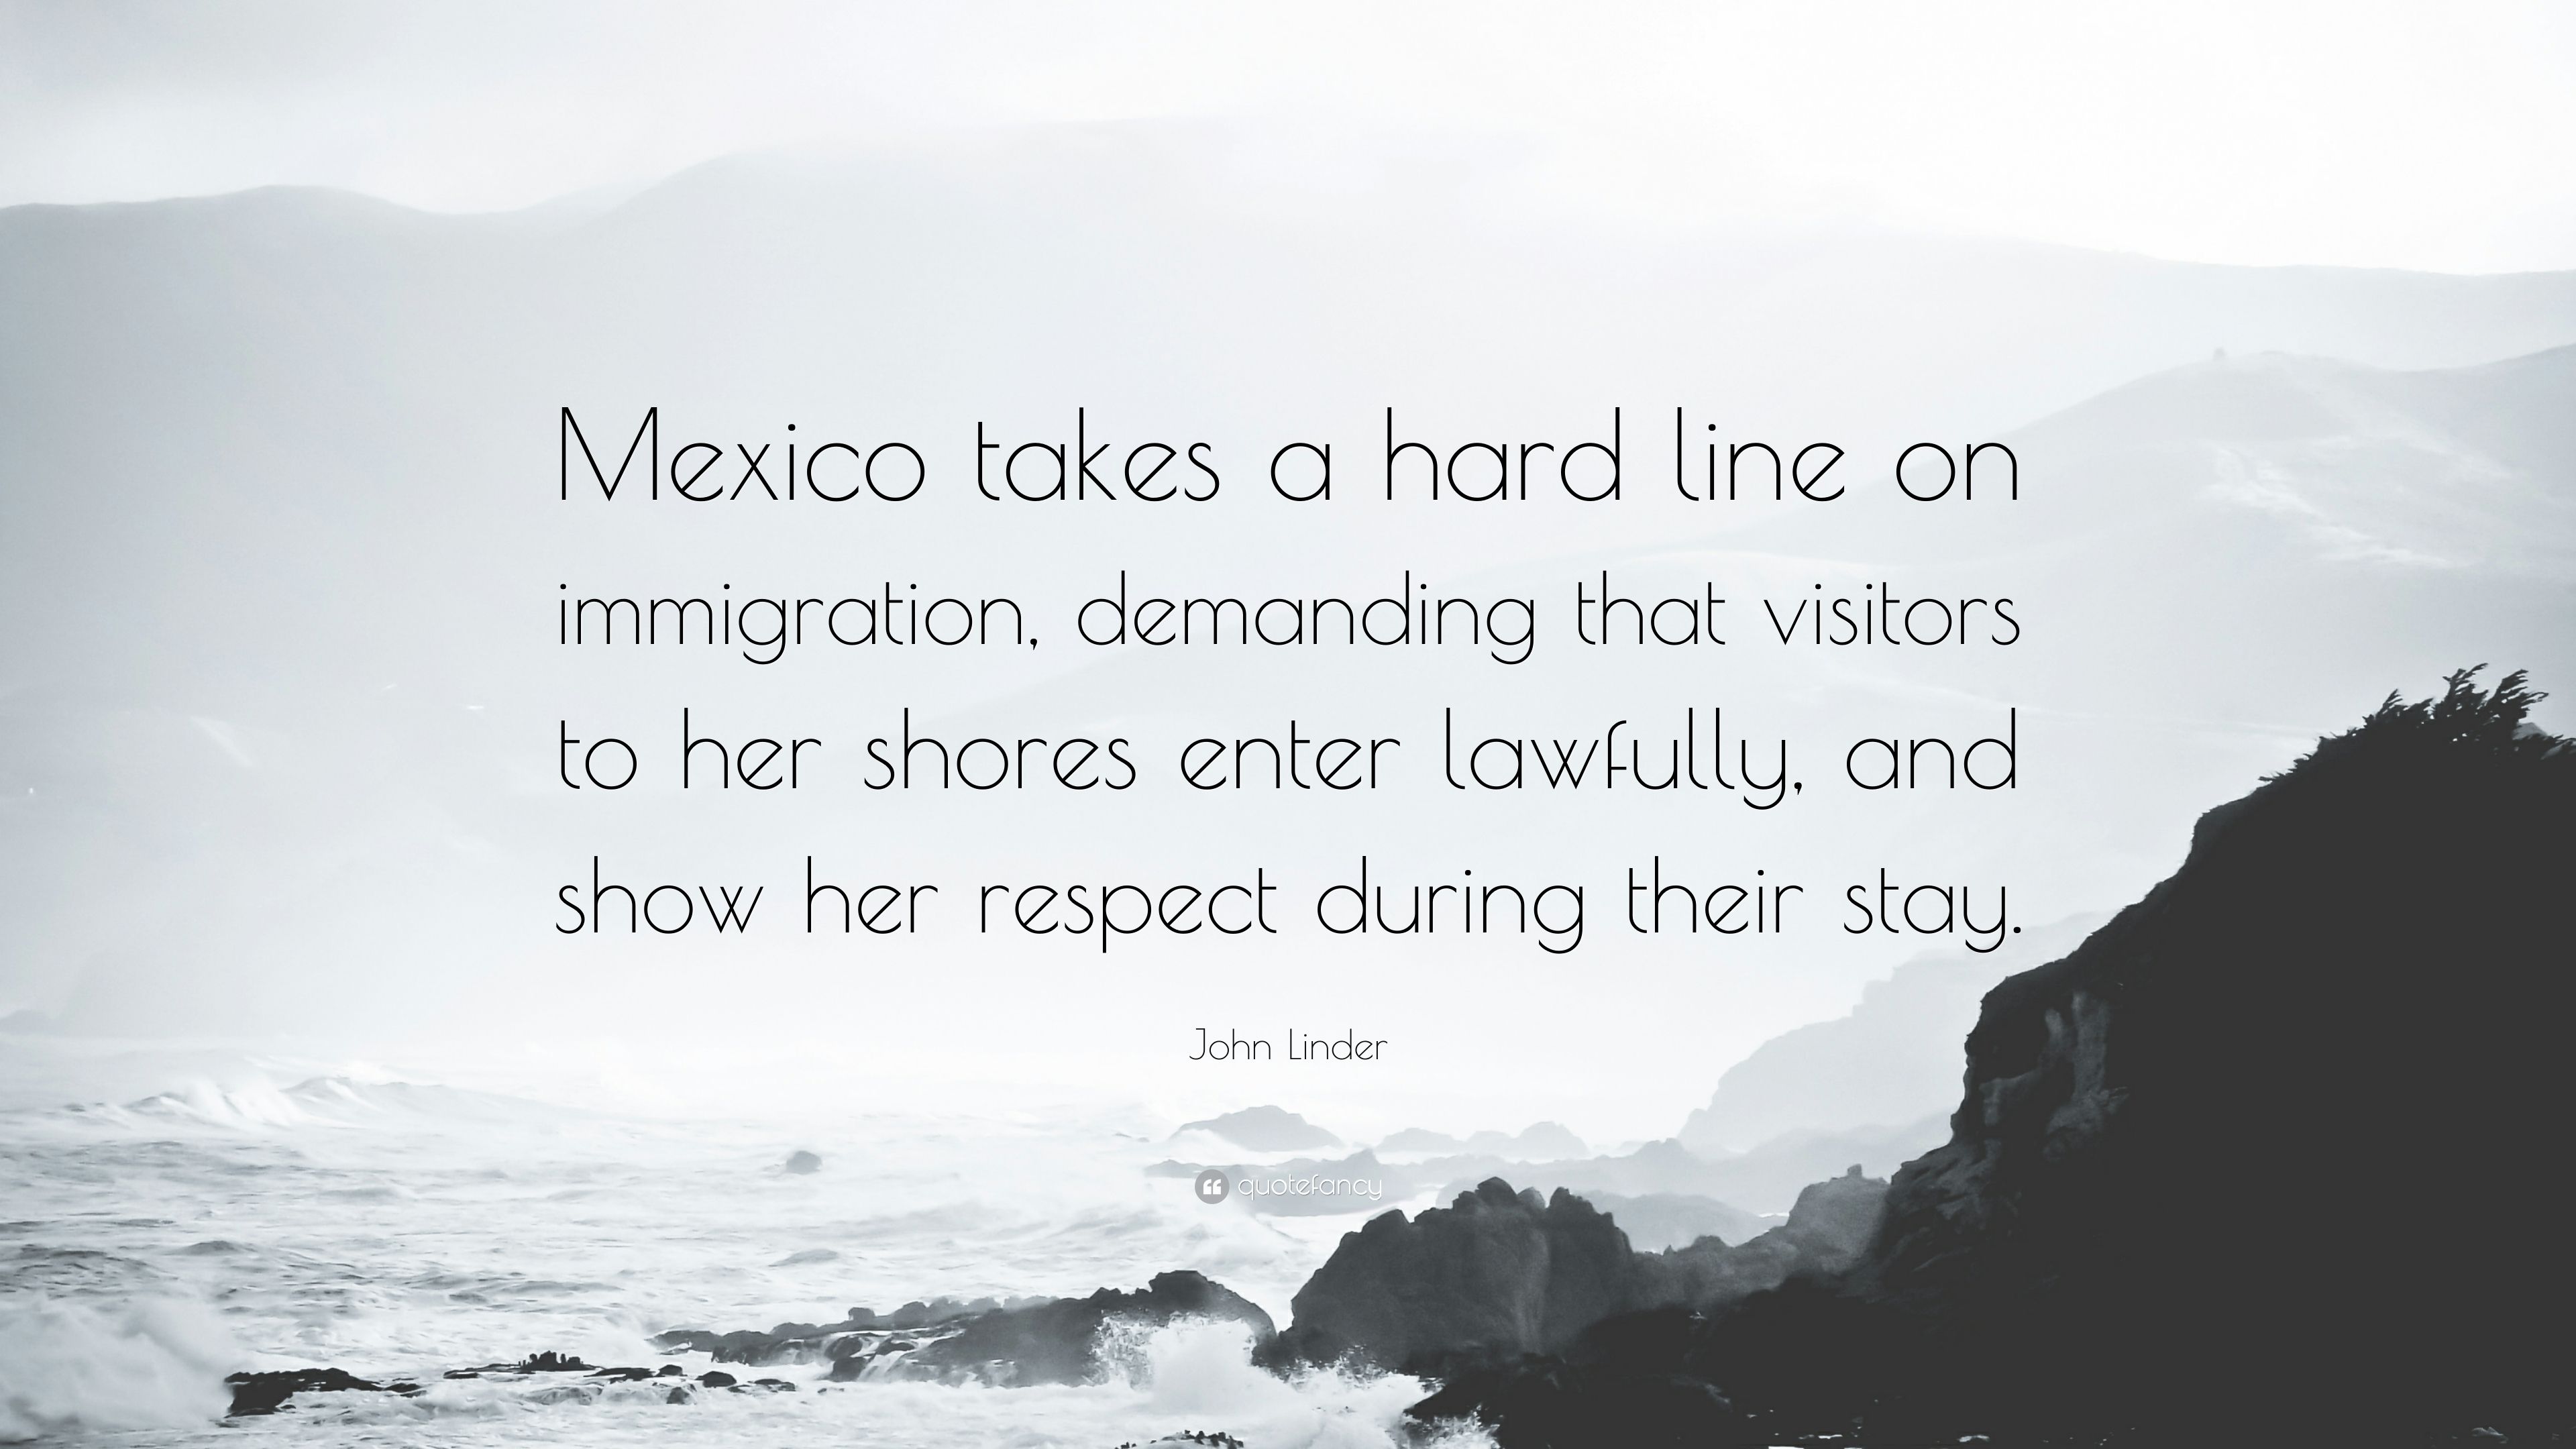 John Linder Quote: “Mexico takes a hard line on immigration, demanding that visitors to her shores enter lawfully, and show her respect duri.” (7 wallpaper)